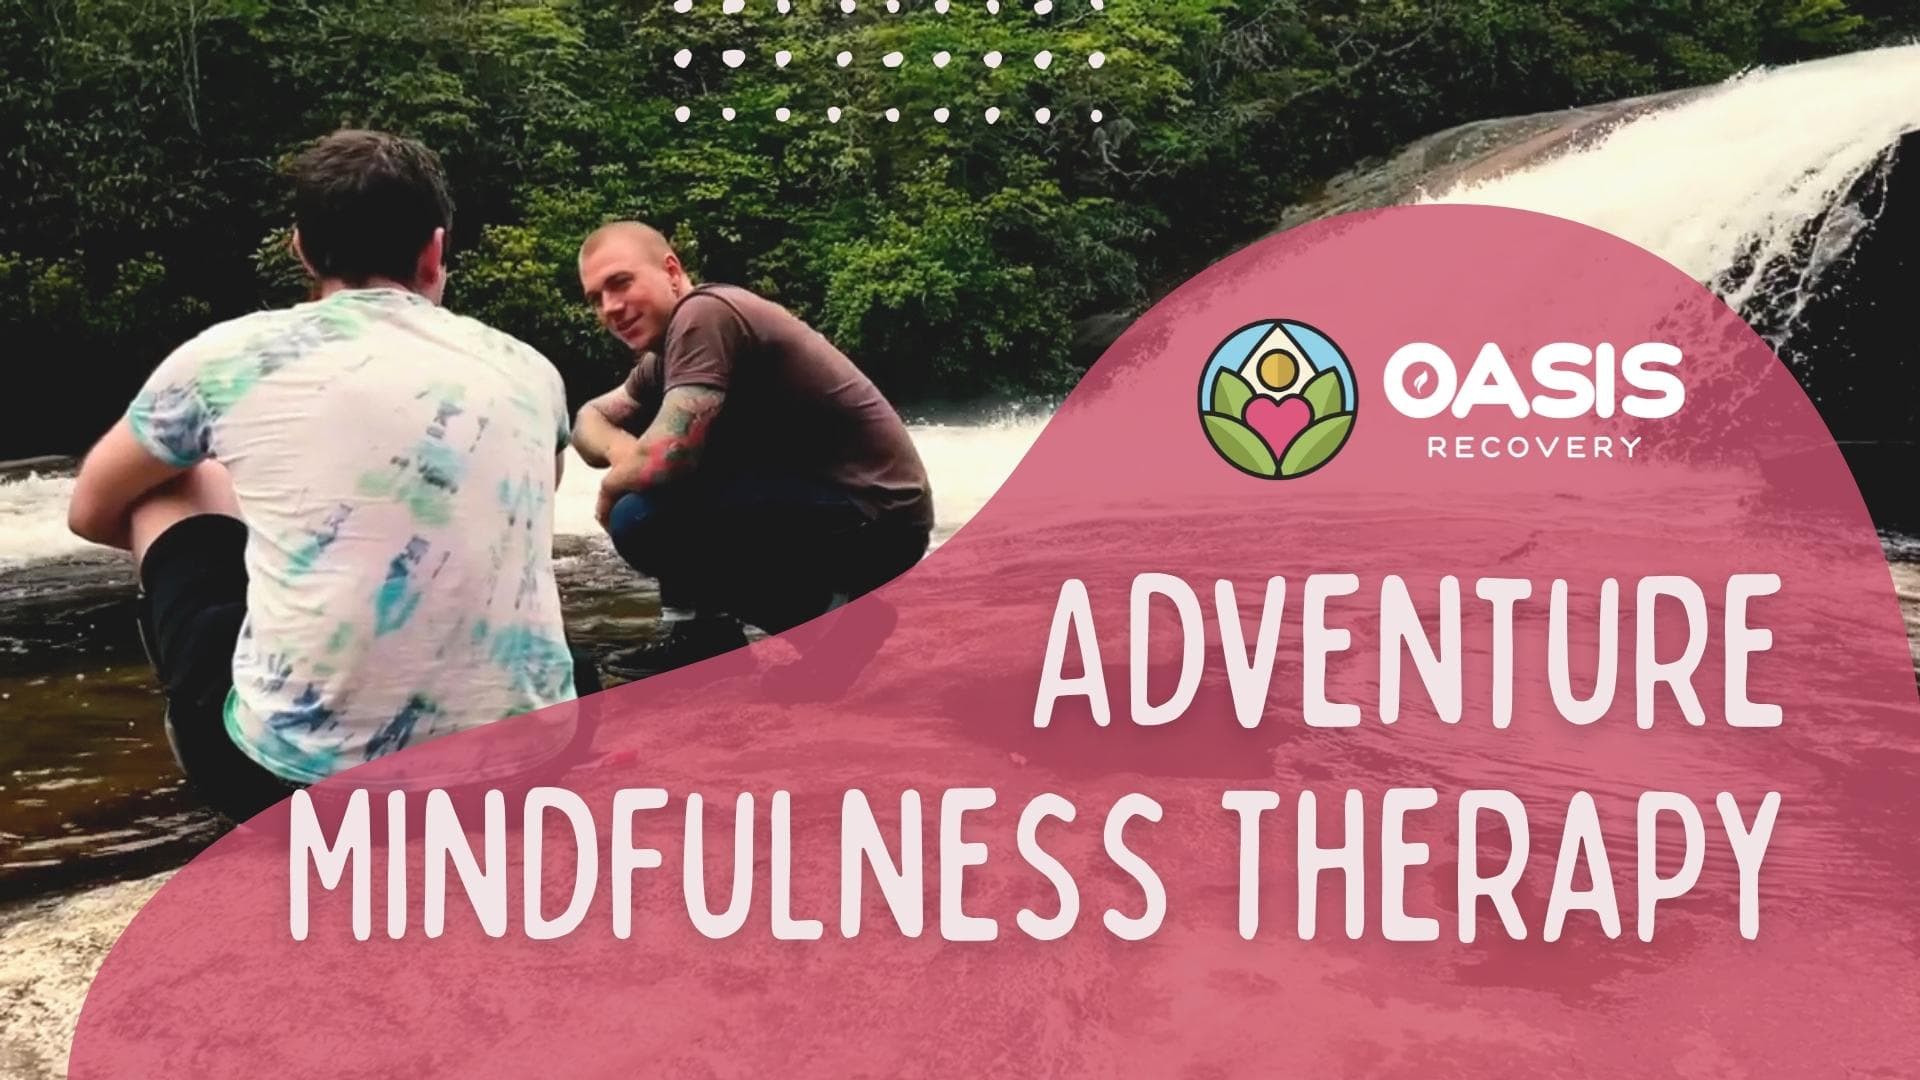 Adventure Therapy at Oasis